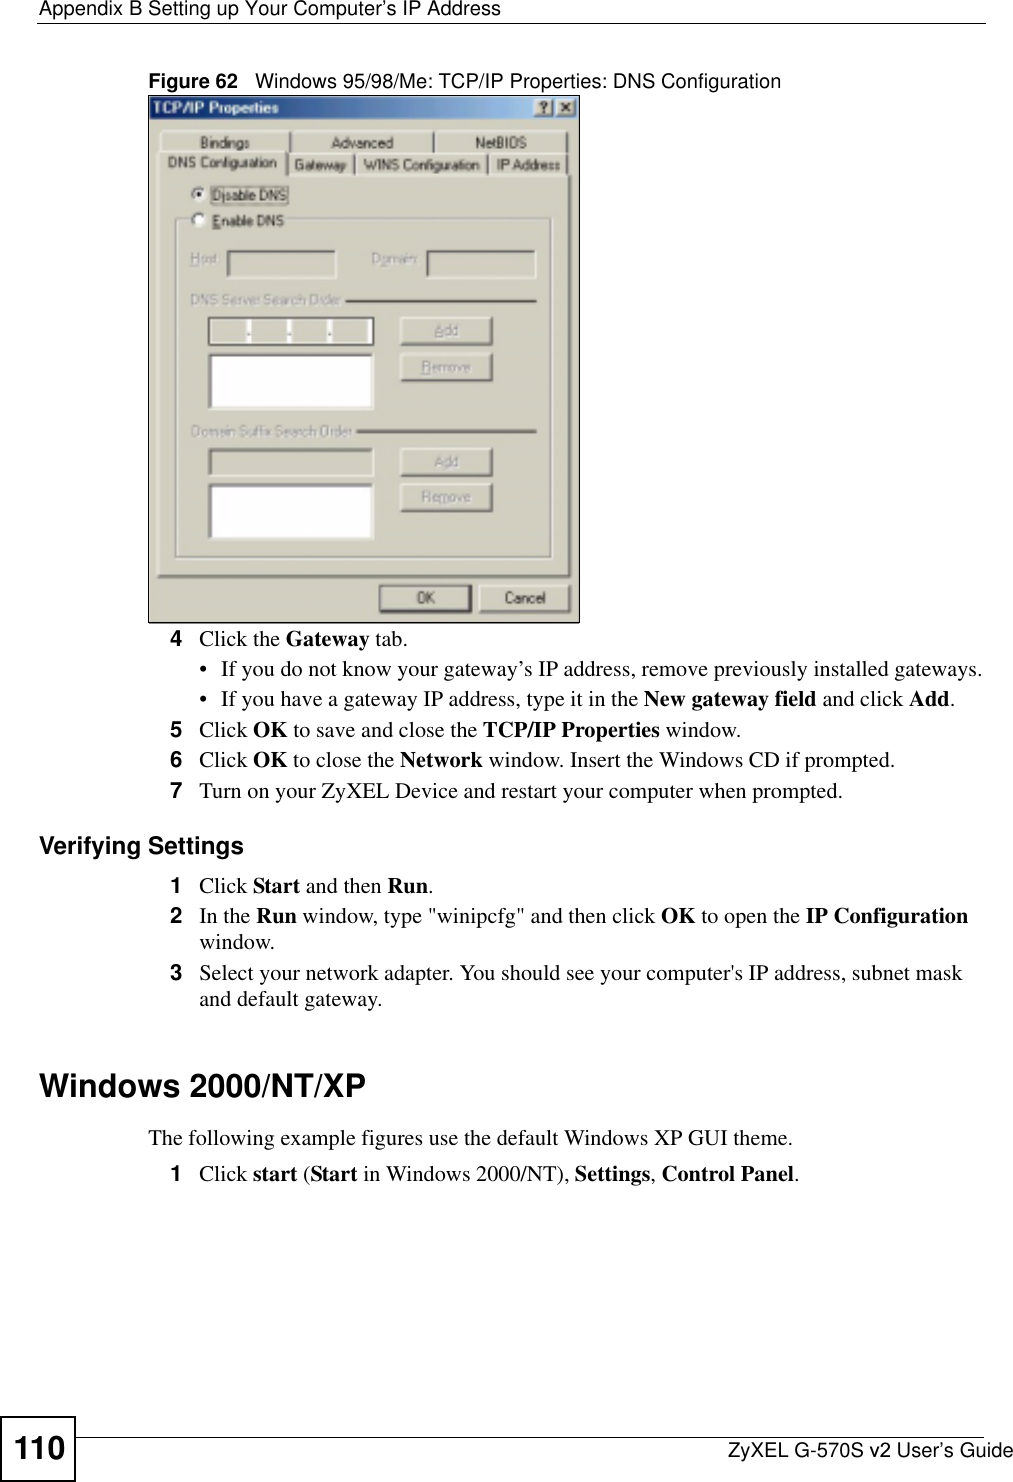 Appendix B Setting up Your Computer’s IP AddressZyXEL G-570S v2 User’s Guide110Figure 62   Windows 95/98/Me: TCP/IP Properties: DNS Configuration4Click the Gateway tab.• If you do not know your gateway’s IP address, remove previously installed gateways.• If you have a gateway IP address, type it in the New gateway field and click Add.5Click OK to save and close the TCP/IP Properties window.6Click OK to close the Network window. Insert the Windows CD if prompted.7Turn on your ZyXEL Device and restart your computer when prompted.Verifying Settings1Click Start and then Run.2In the Run window, type &quot;winipcfg&quot; and then click OK to open the IP Configurationwindow.3Select your network adapter. You should see your computer&apos;s IP address, subnet mask and default gateway.Windows 2000/NT/XPThe following example figures use the default Windows XP GUI theme.1Click start (Start in Windows 2000/NT), Settings,Control Panel.